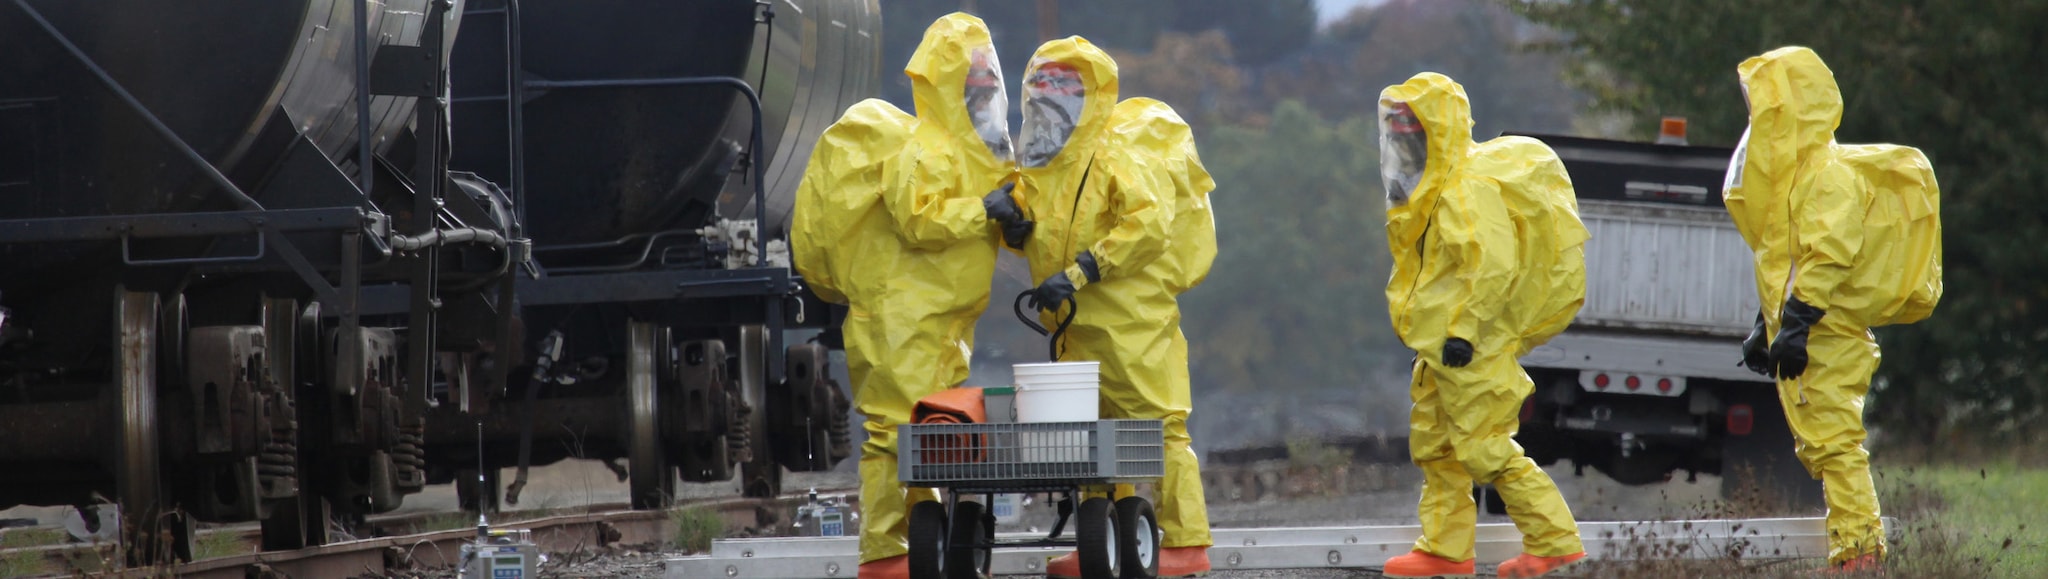 People investigating toxic substances near freight train while wearing hazmat suits